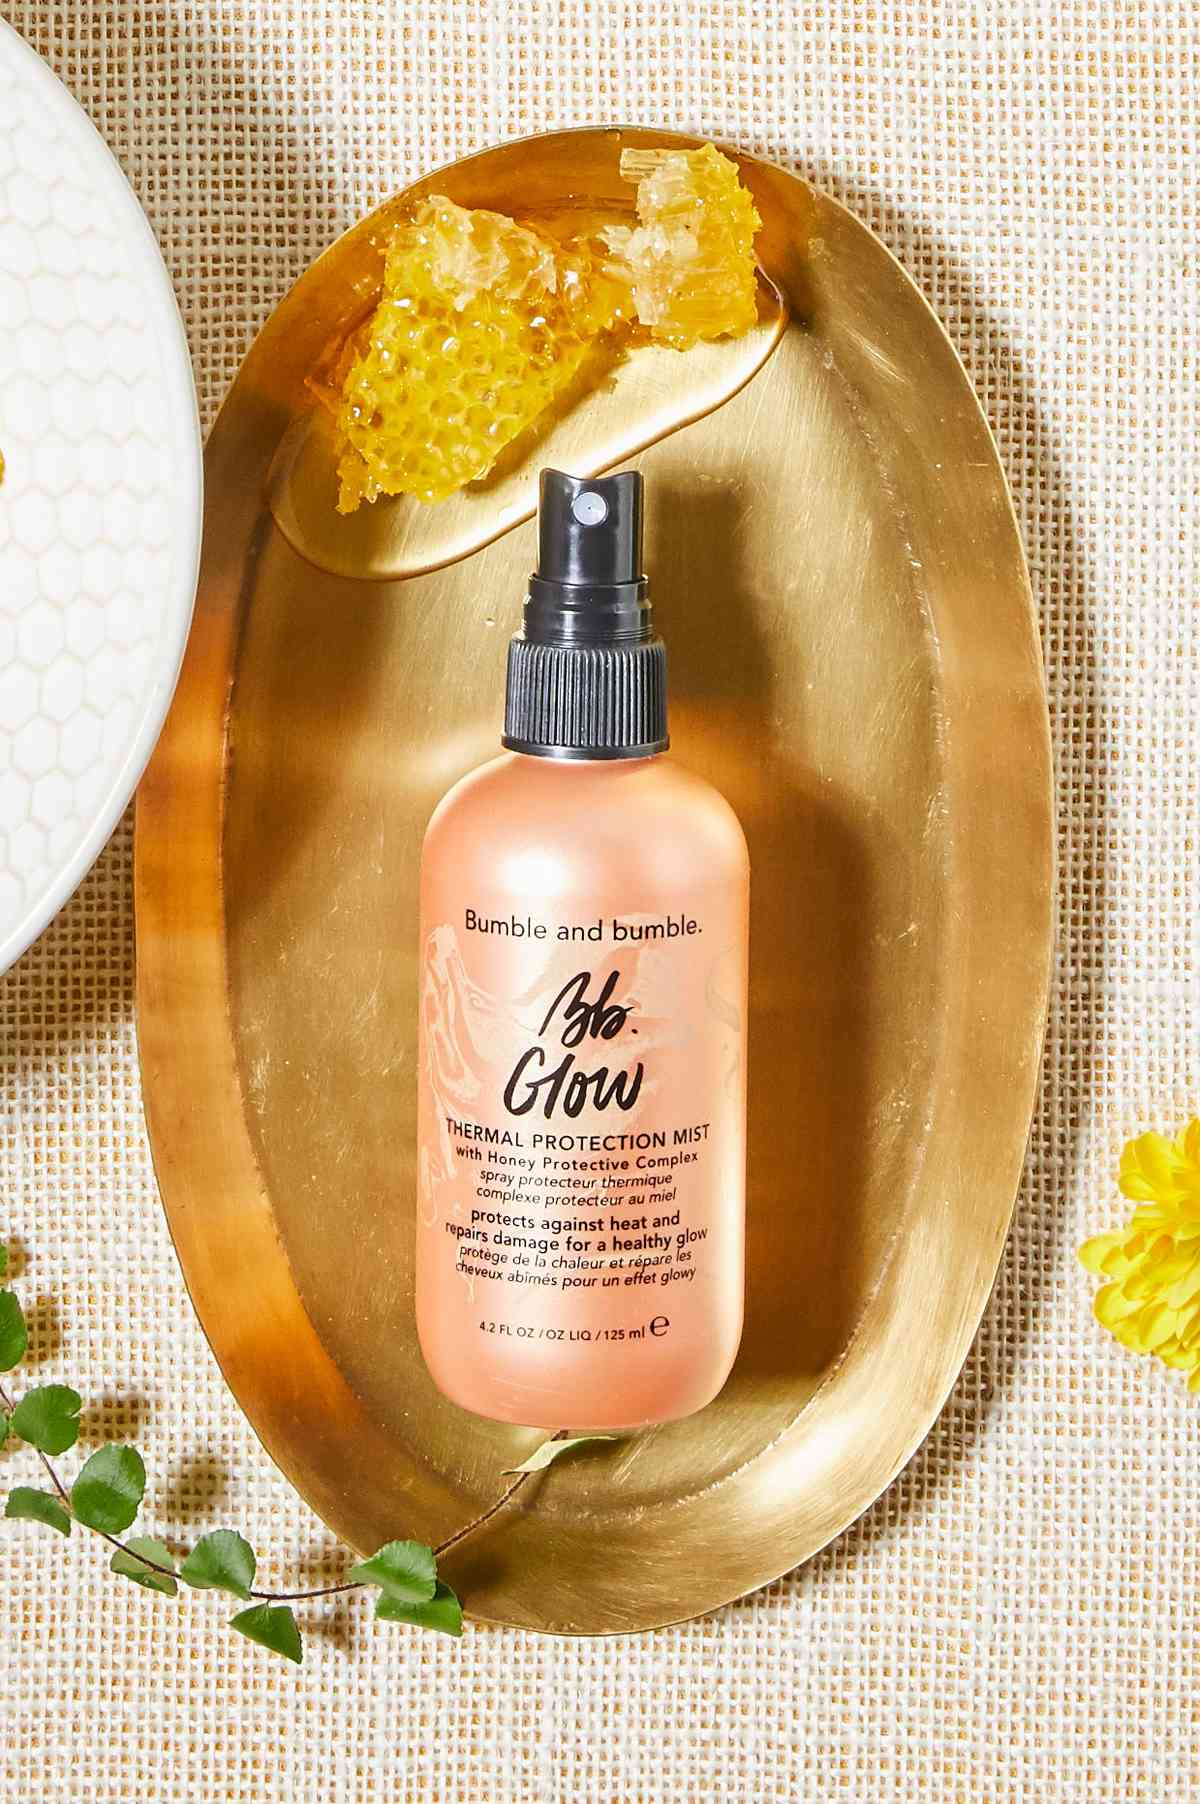 Bumble and bumble Glow Thermal Protection Mist